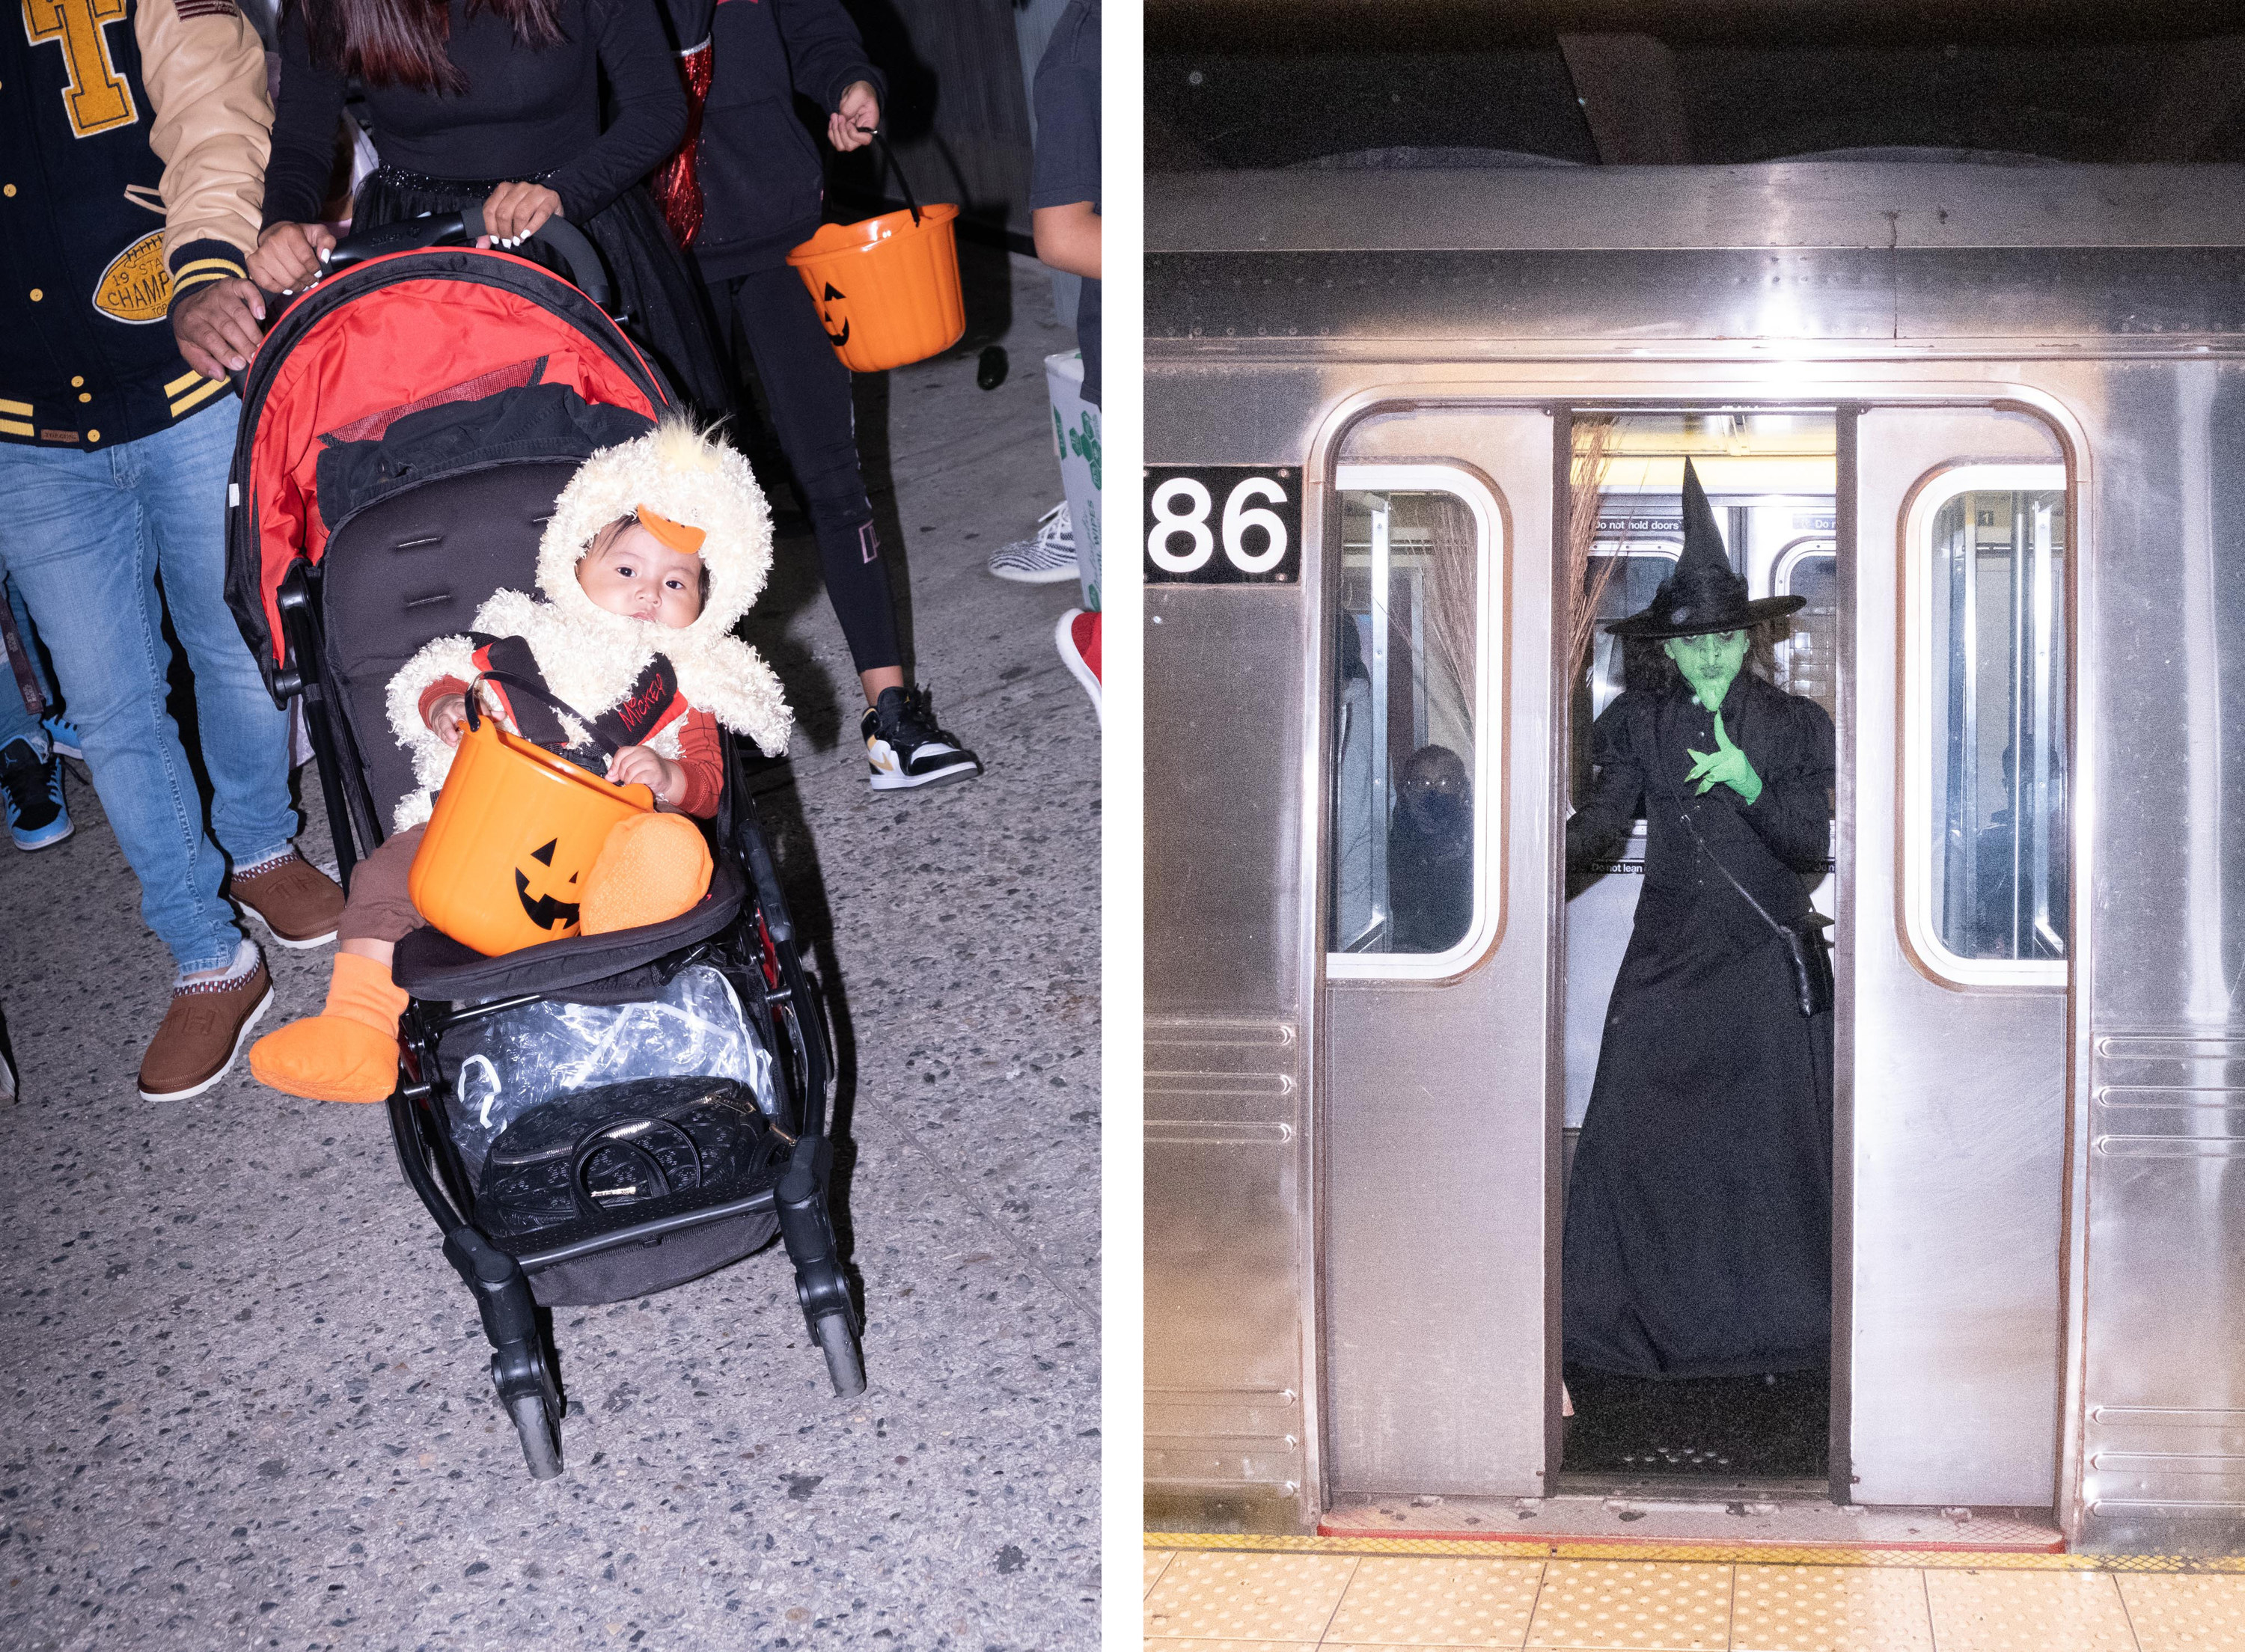 A baby in a stroller in costume with a pumpkin bucket, right a witch between closing subway doors